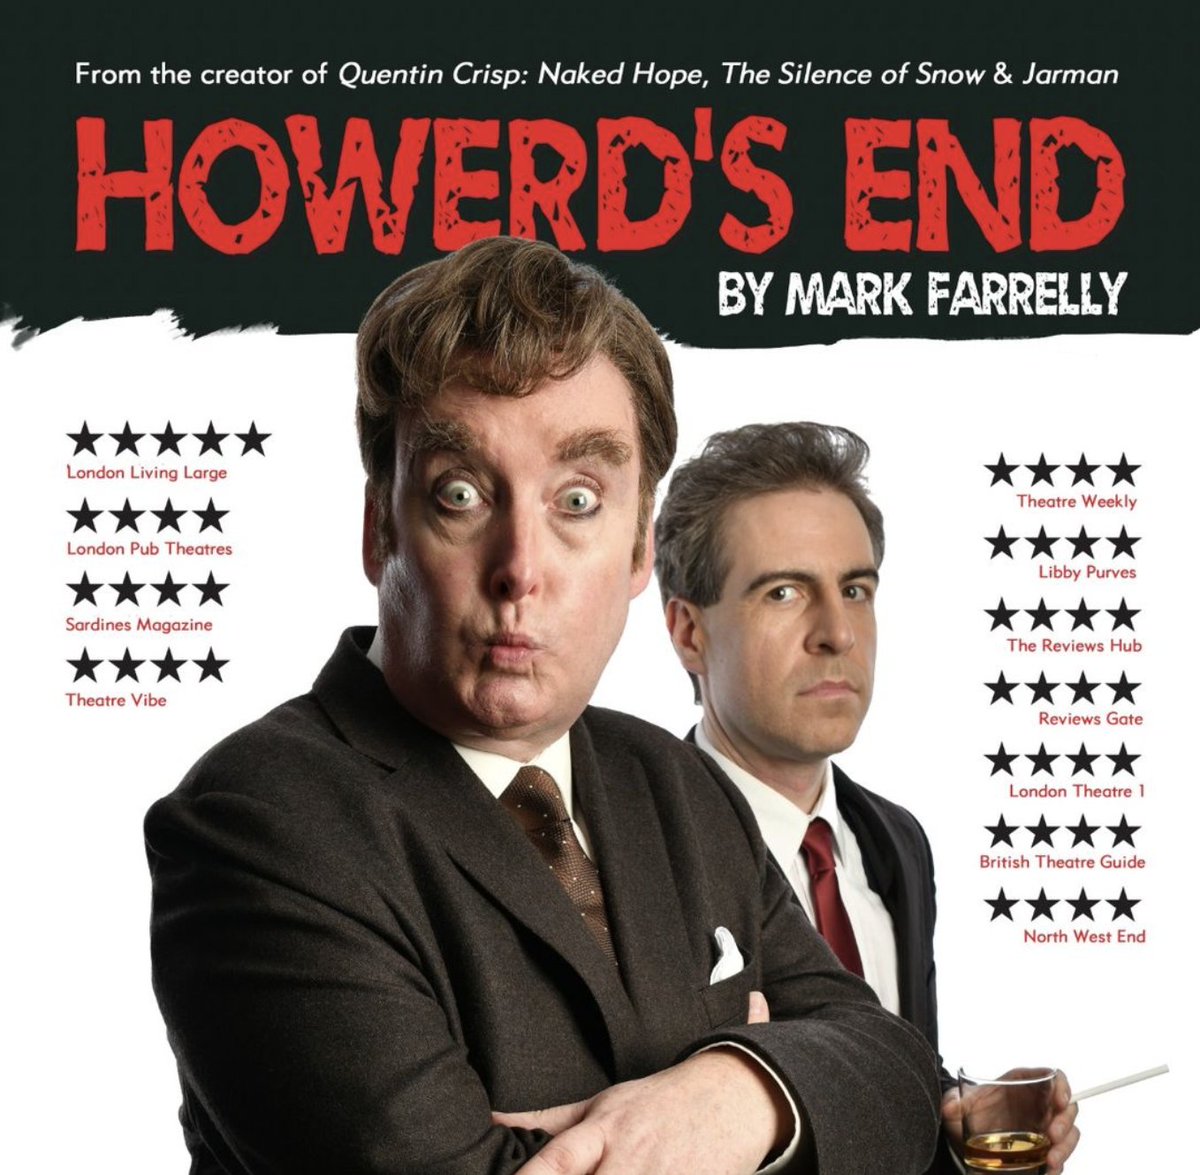 #HowerdsEnd is a piercingly honest love story about a relationship that tried to defy every odd – including death.

'I knew Dennis, & I wrote for Frankie – & this play is brilliant' – Barry Cryer

➡️ Opens 14 Feb | £10 tickets:
kingsheadtheatre.com/whats-on/hower…